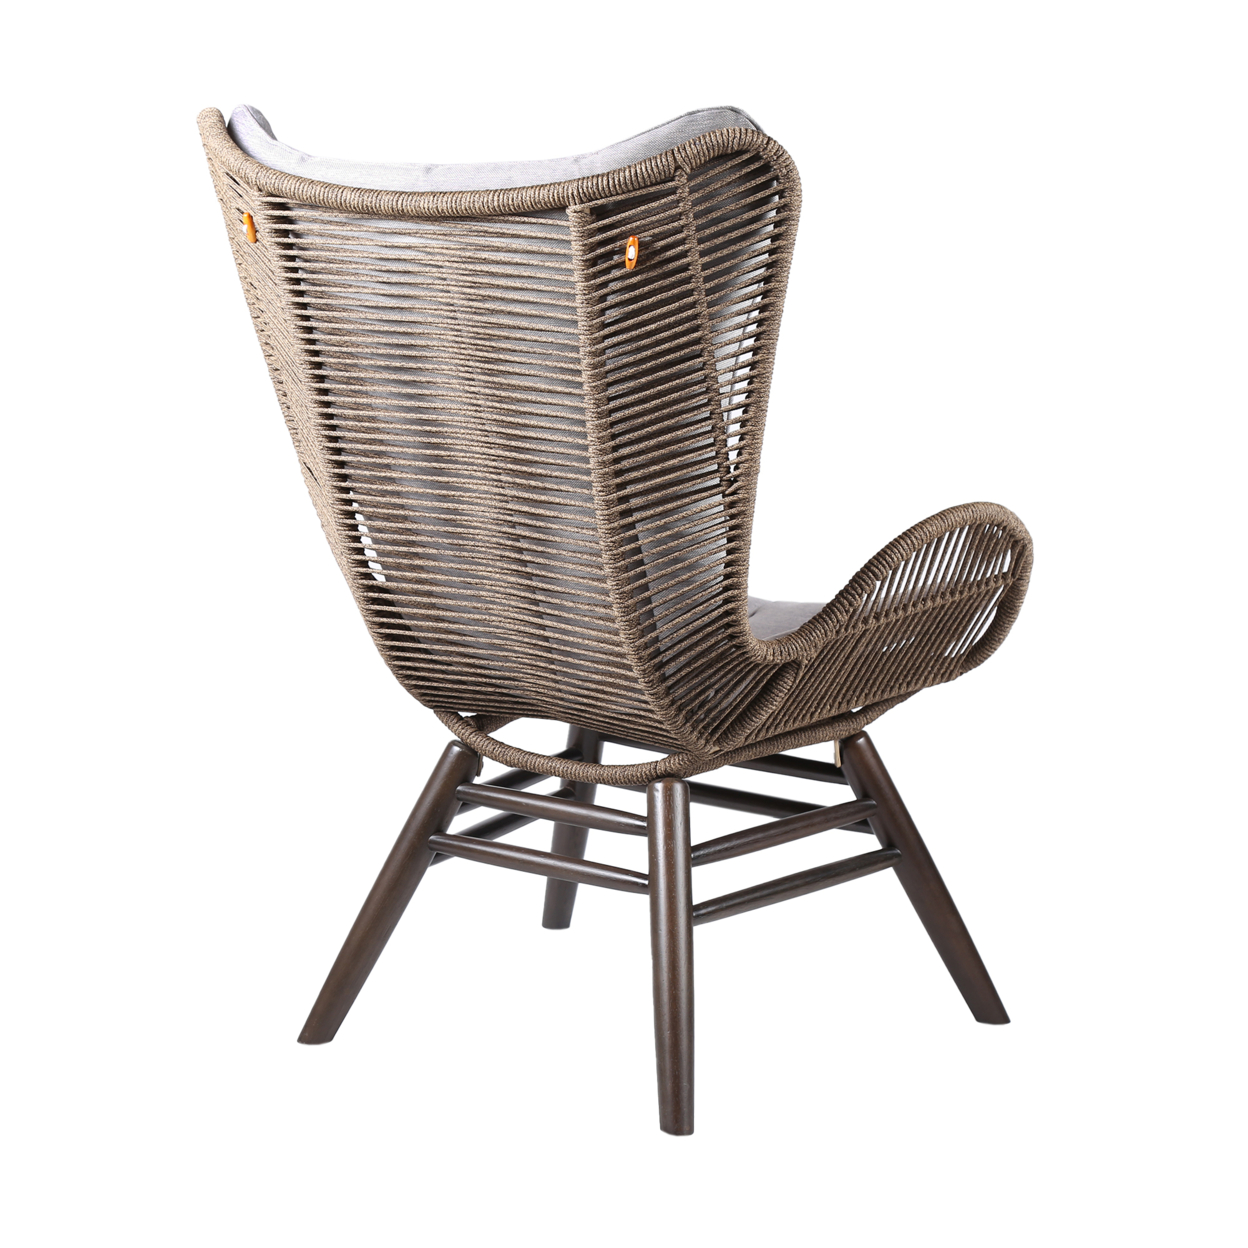 Indoor Outdoor Lounge Chair With Intricate Rope Woven Wingback, Brown- Saltoro Sherpi